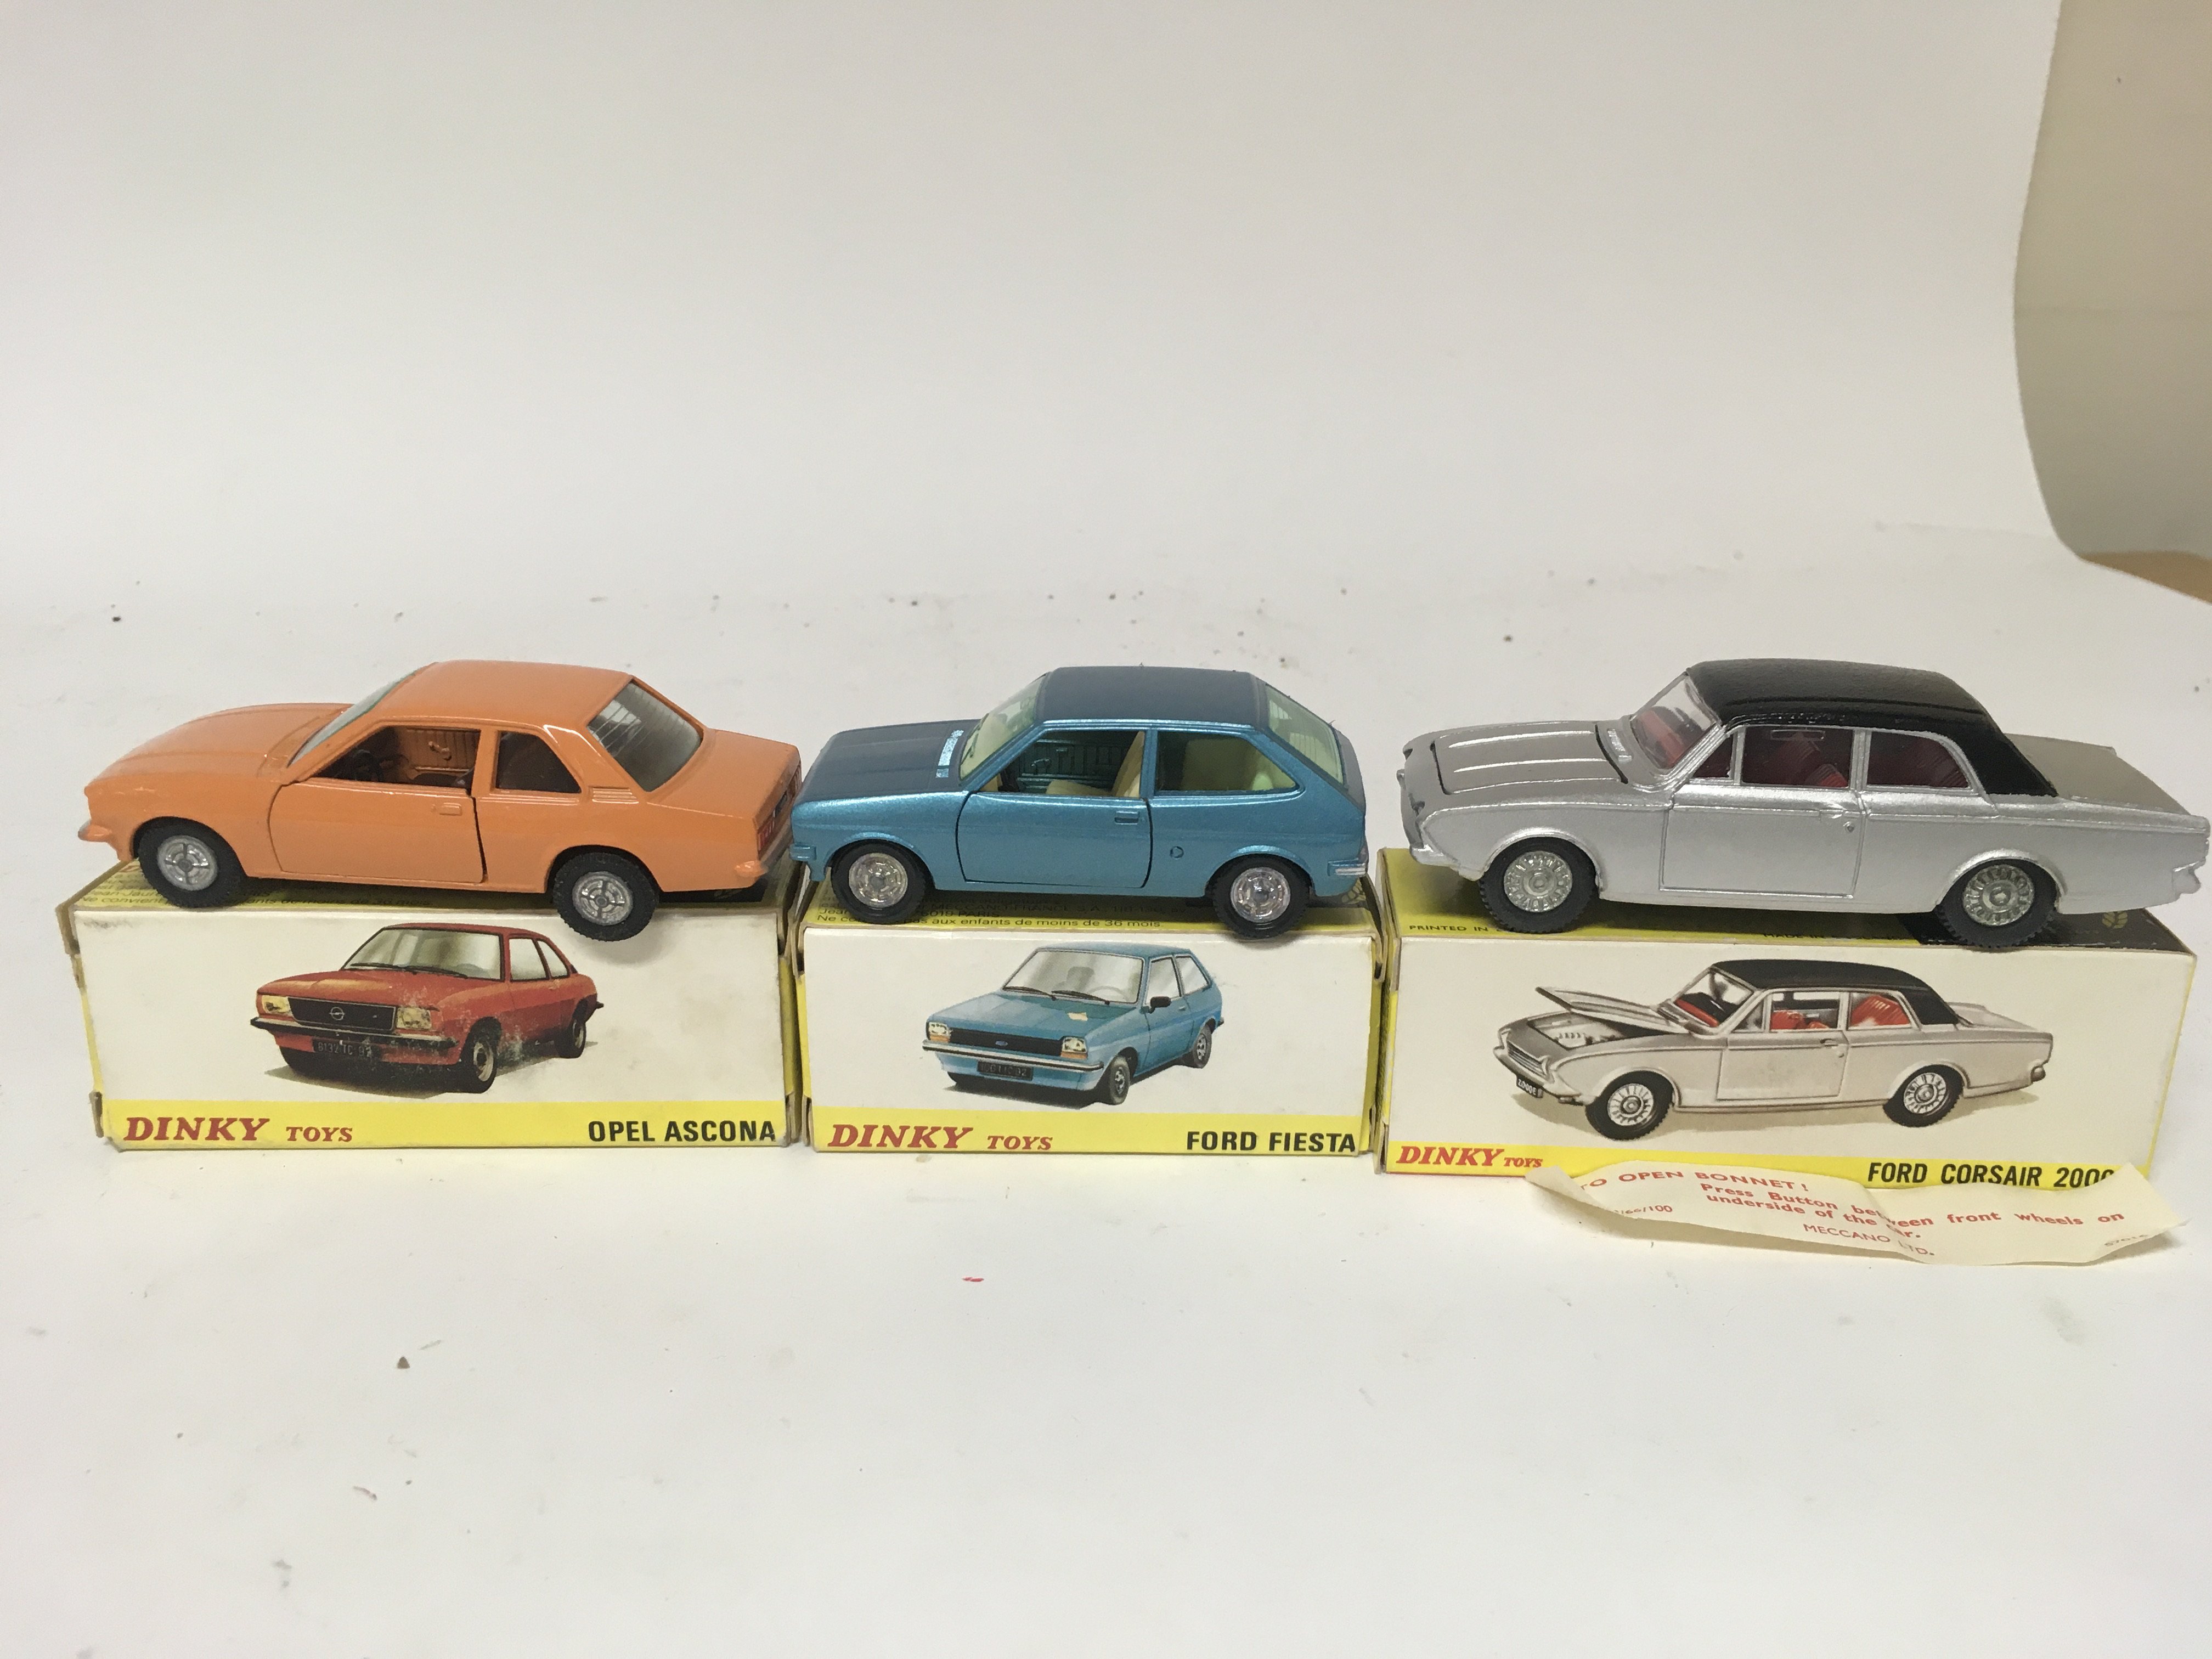 Dinky toys, #011543 Opel Ancona, #011541 Ford Fiesta and #169 Ford Corsair 2000, boxed